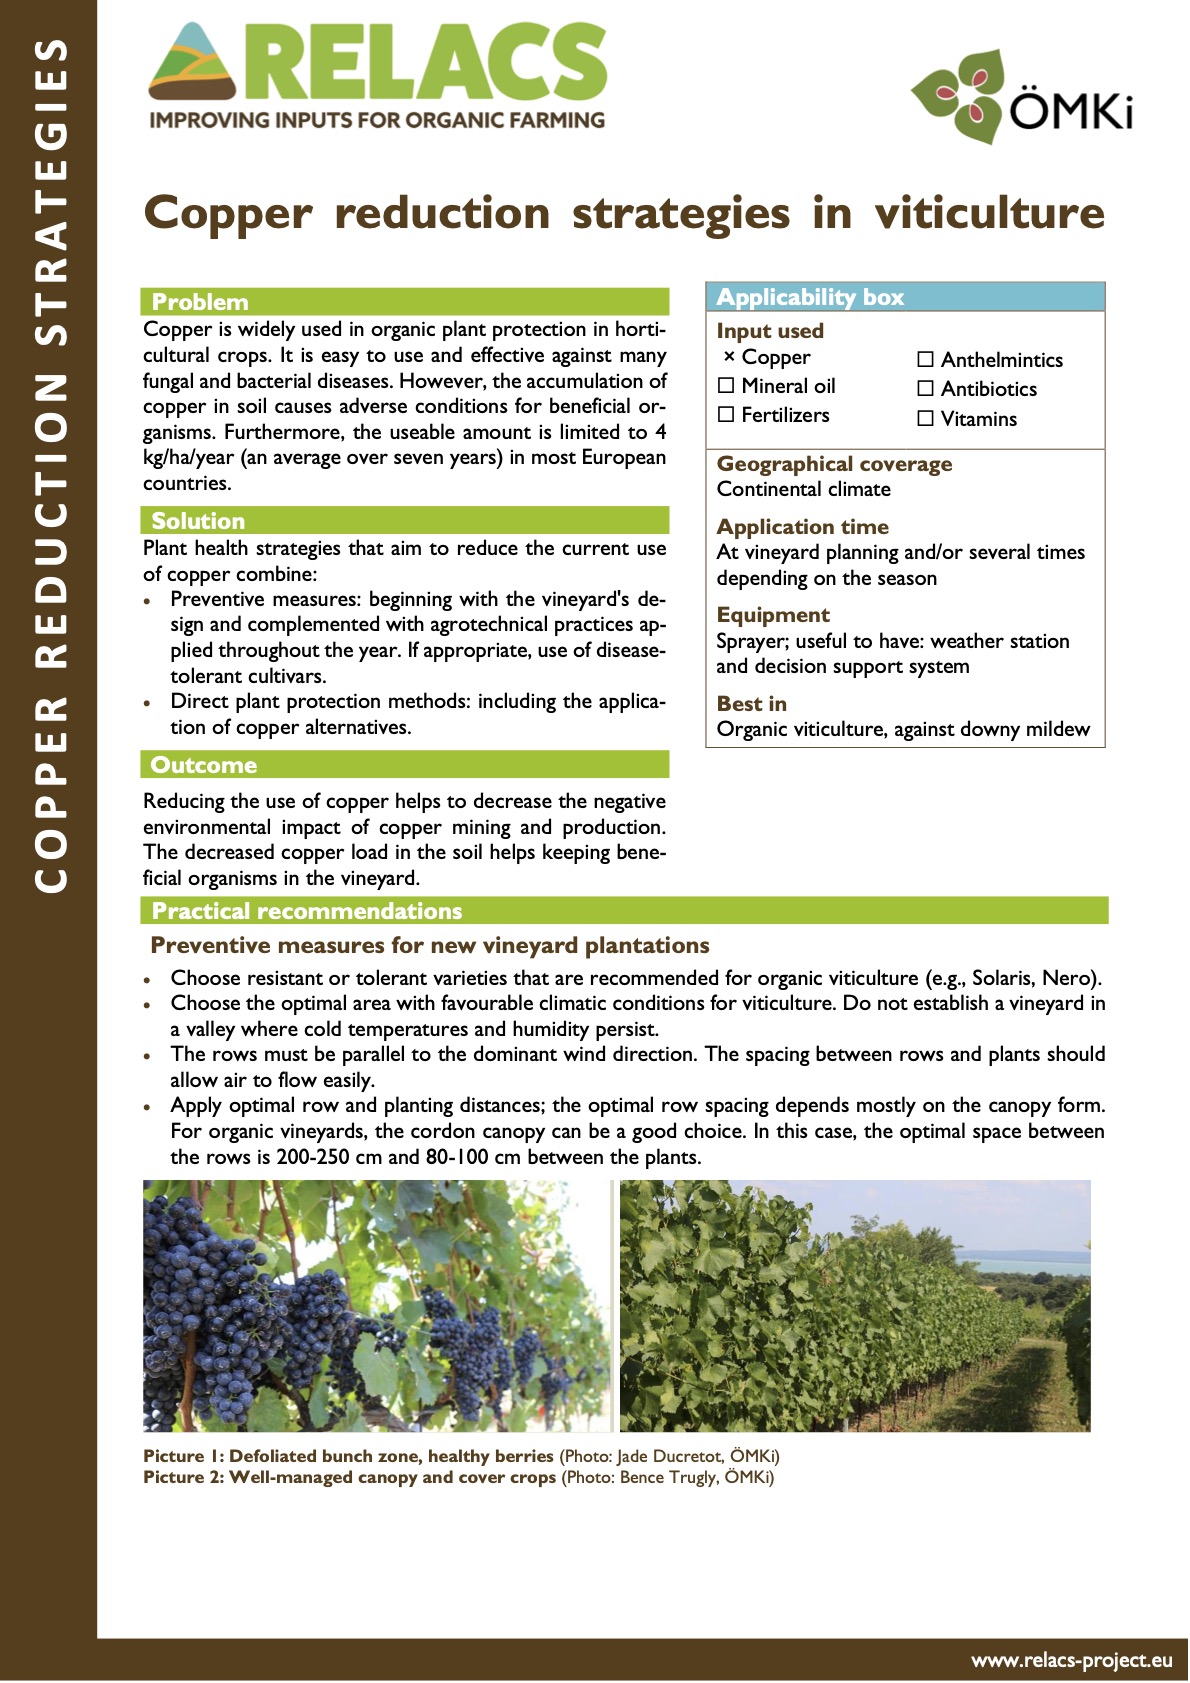 Copper reduction strategies in viticulture (RELACS Practice abstract)